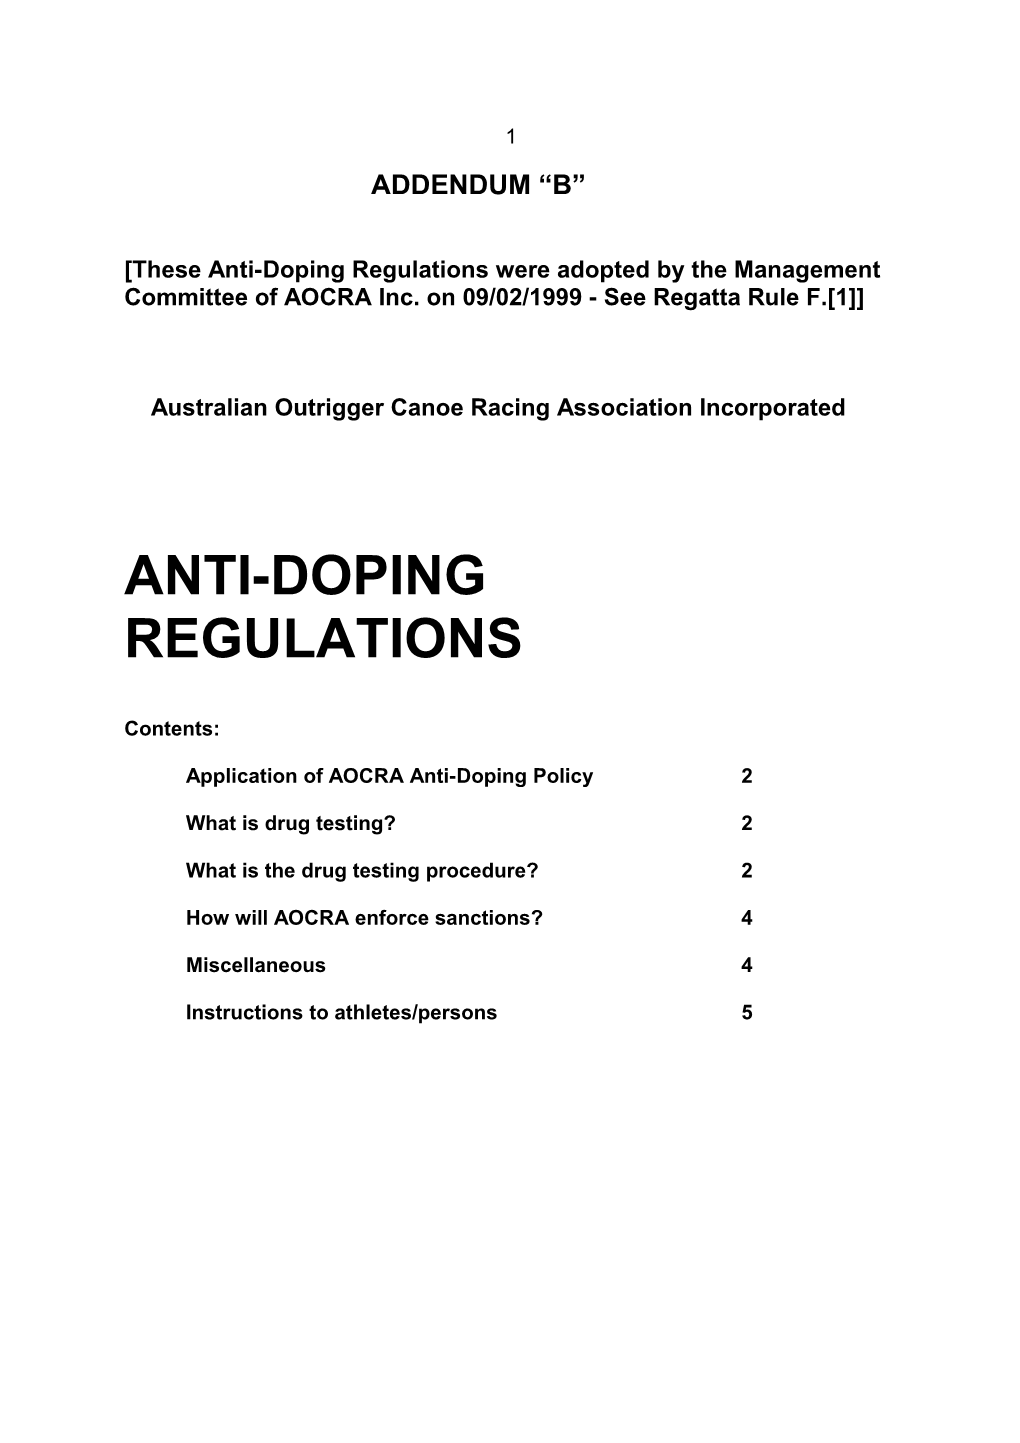 These Anti-Doping Regulations Were Adopted by the Management